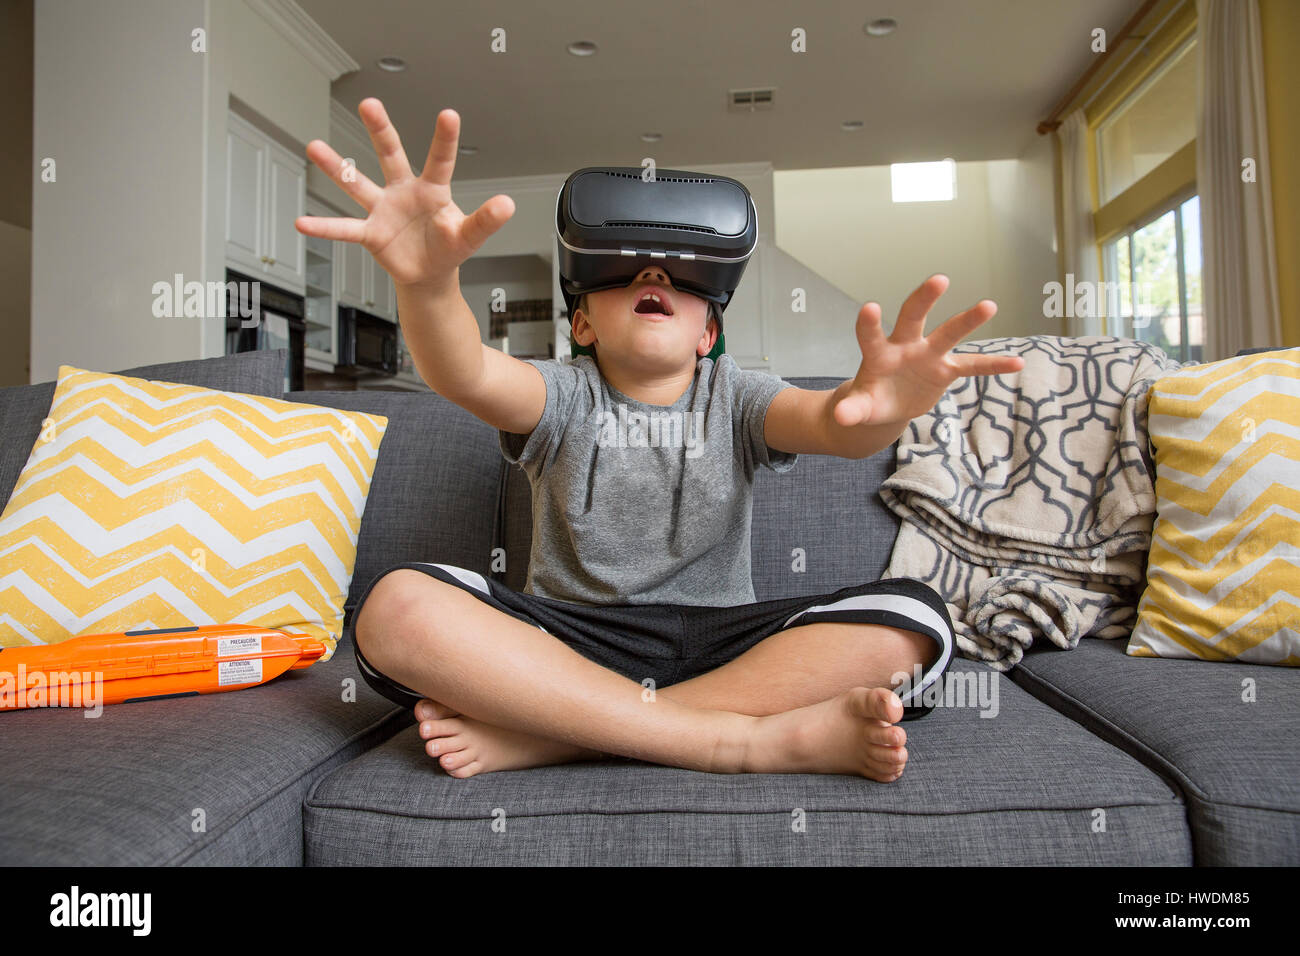 Young boy sitting cross legged on sofa, wearing virtual reality headset, hands reaching out in front of him Stock Photo